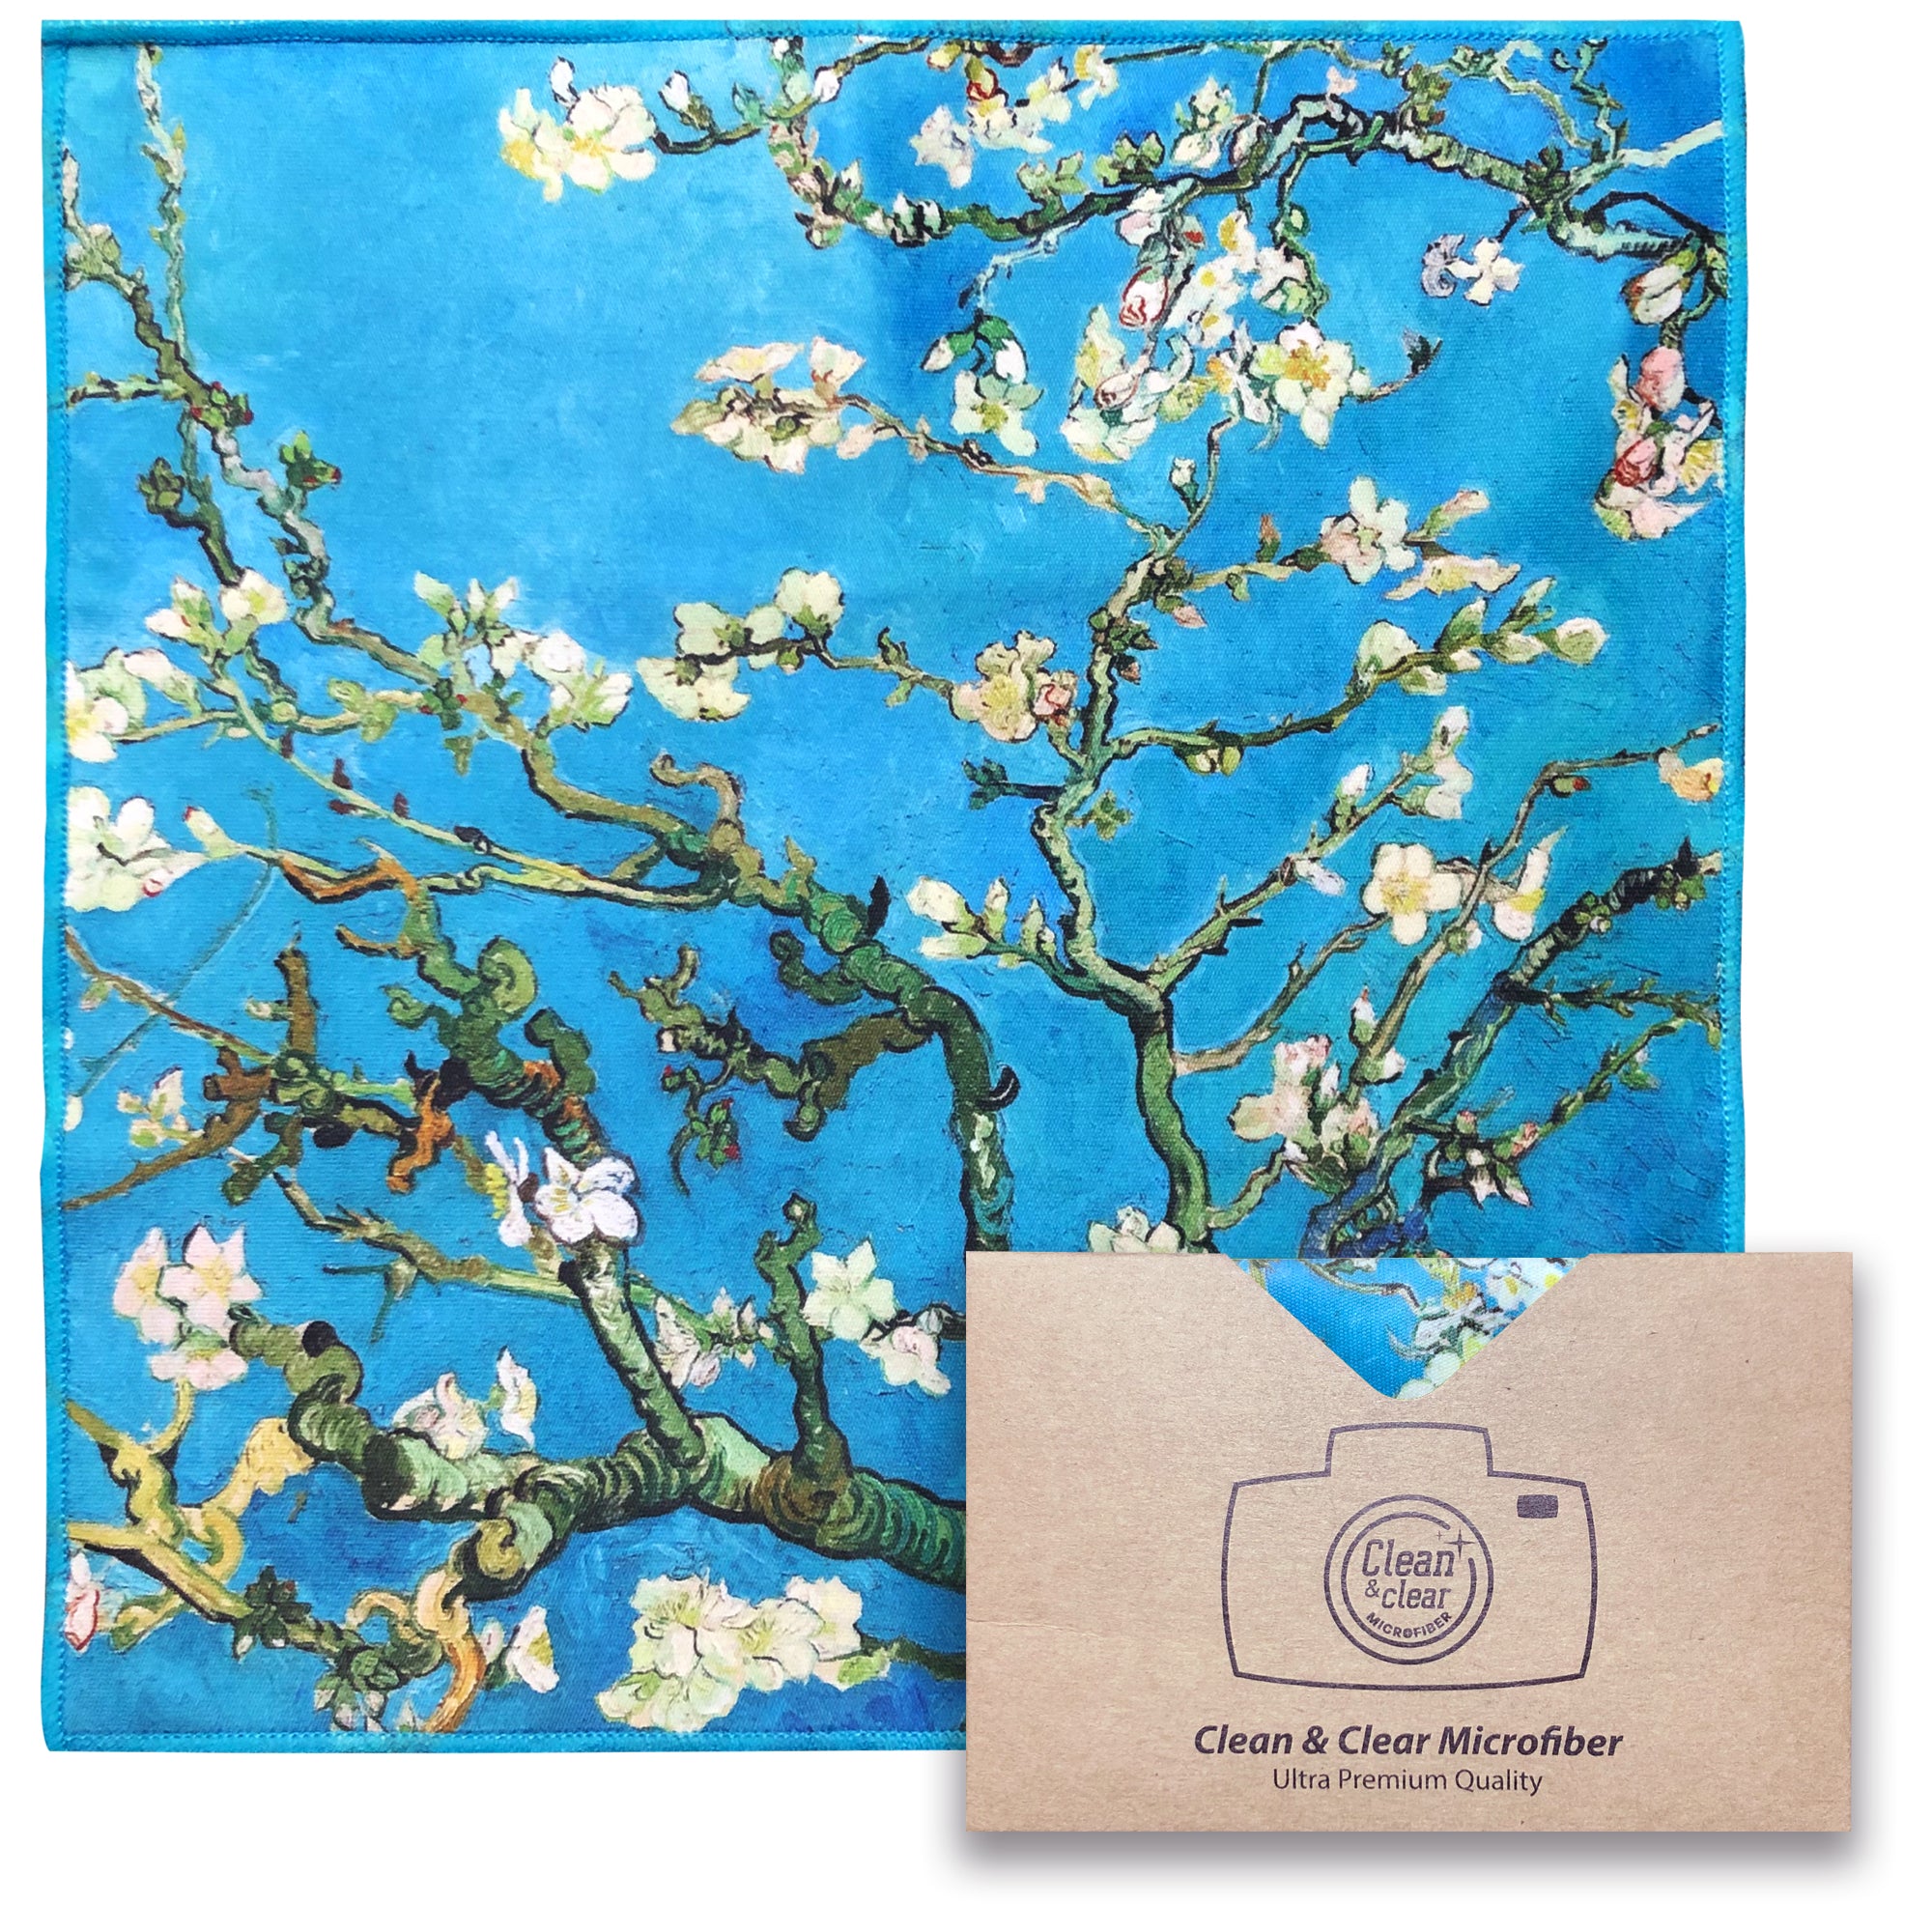 [6 Pack] Vincent Van Gogh "Almond Blossom" - Art Collection - Ultra Premium Quality Microfiber Cleaning Cloths